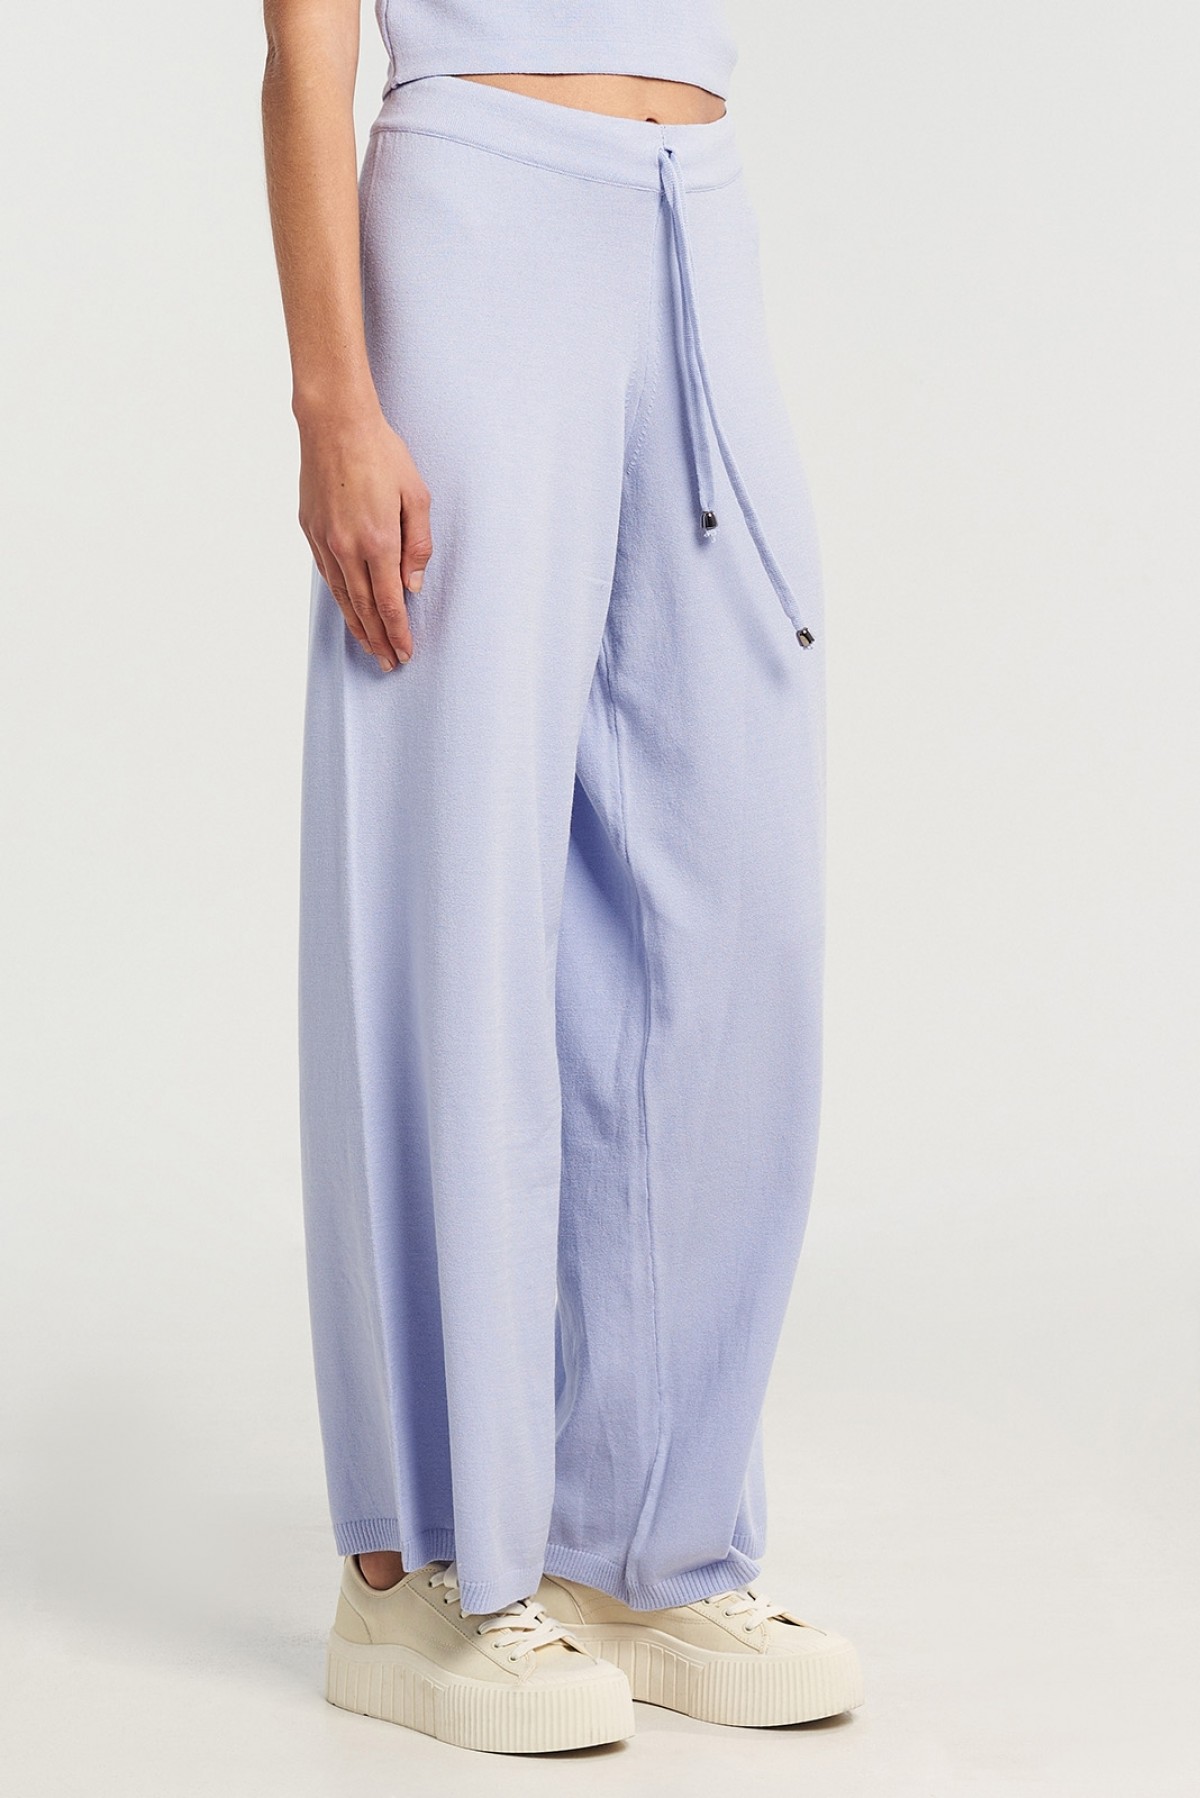 VISCOSE KNIT TROUSERS IN LAVENDER